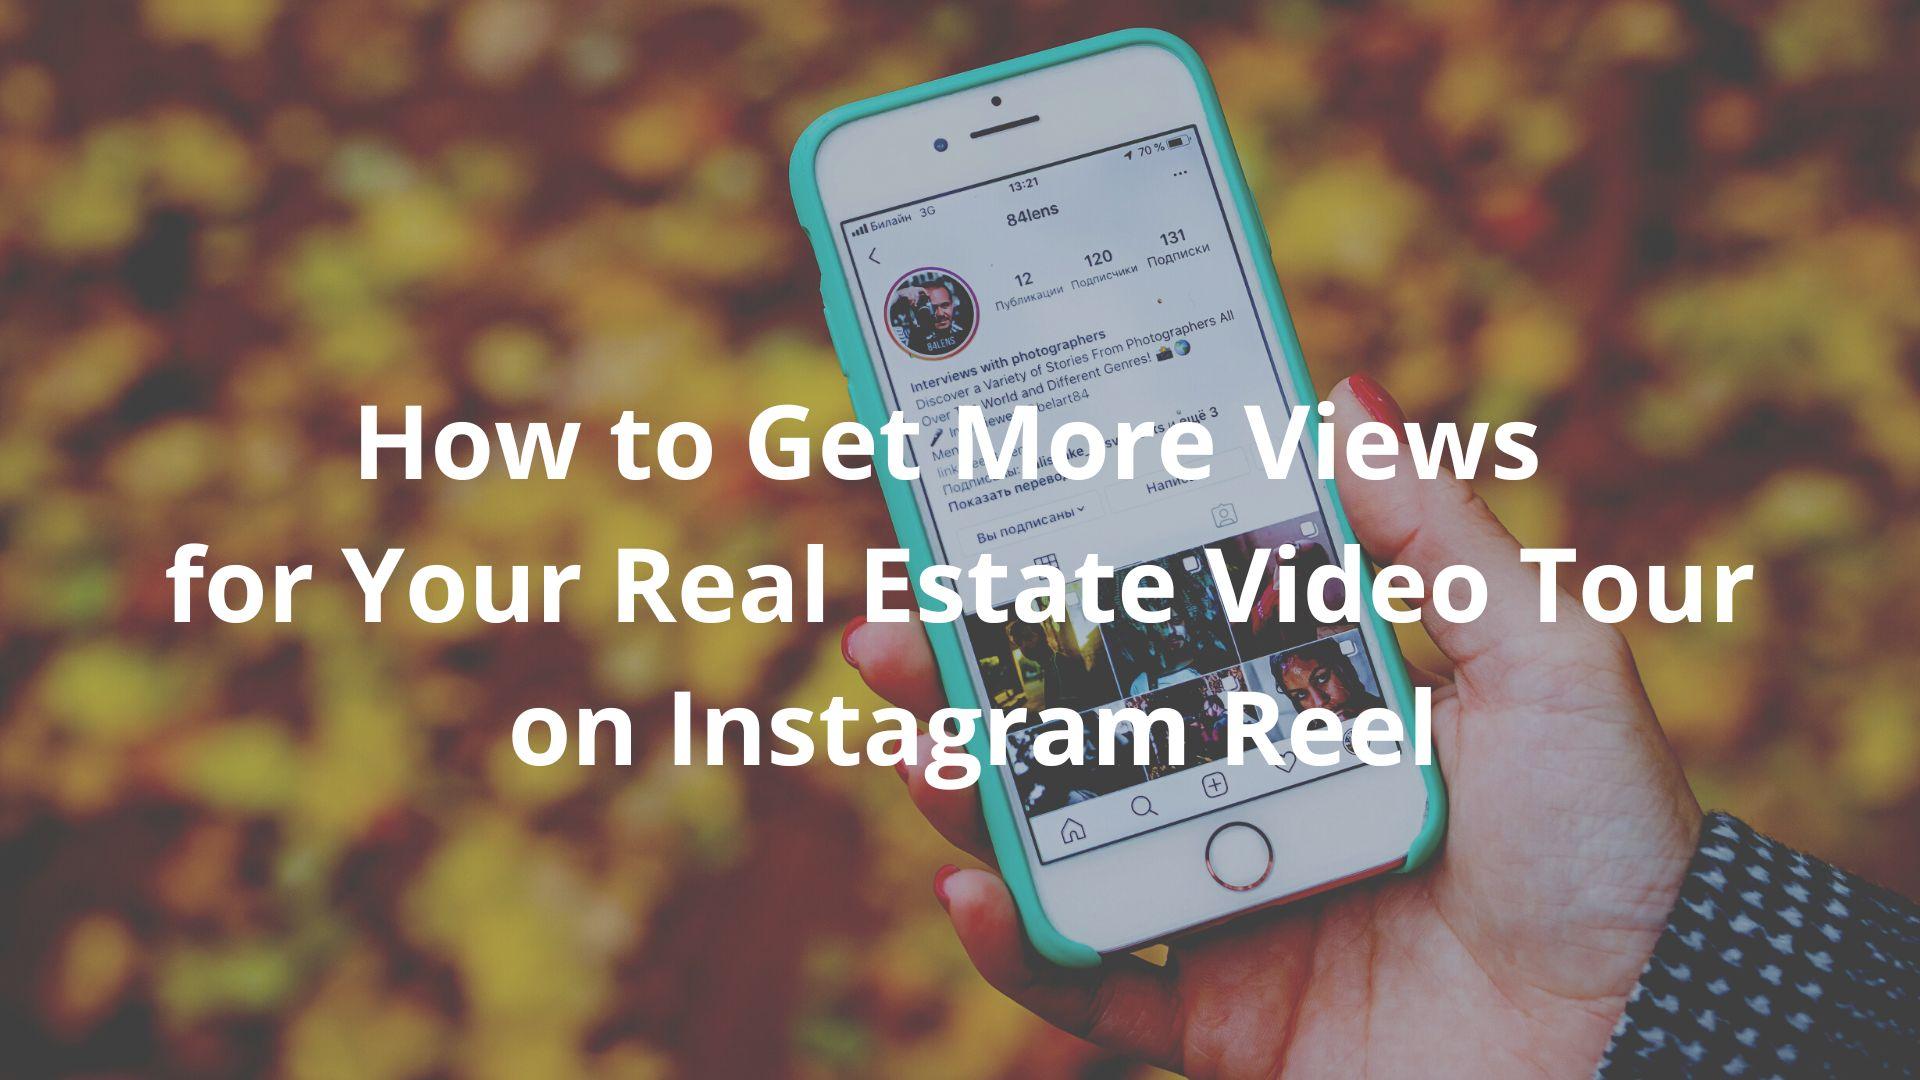 How to get more views for your real estate video tour on Instagram